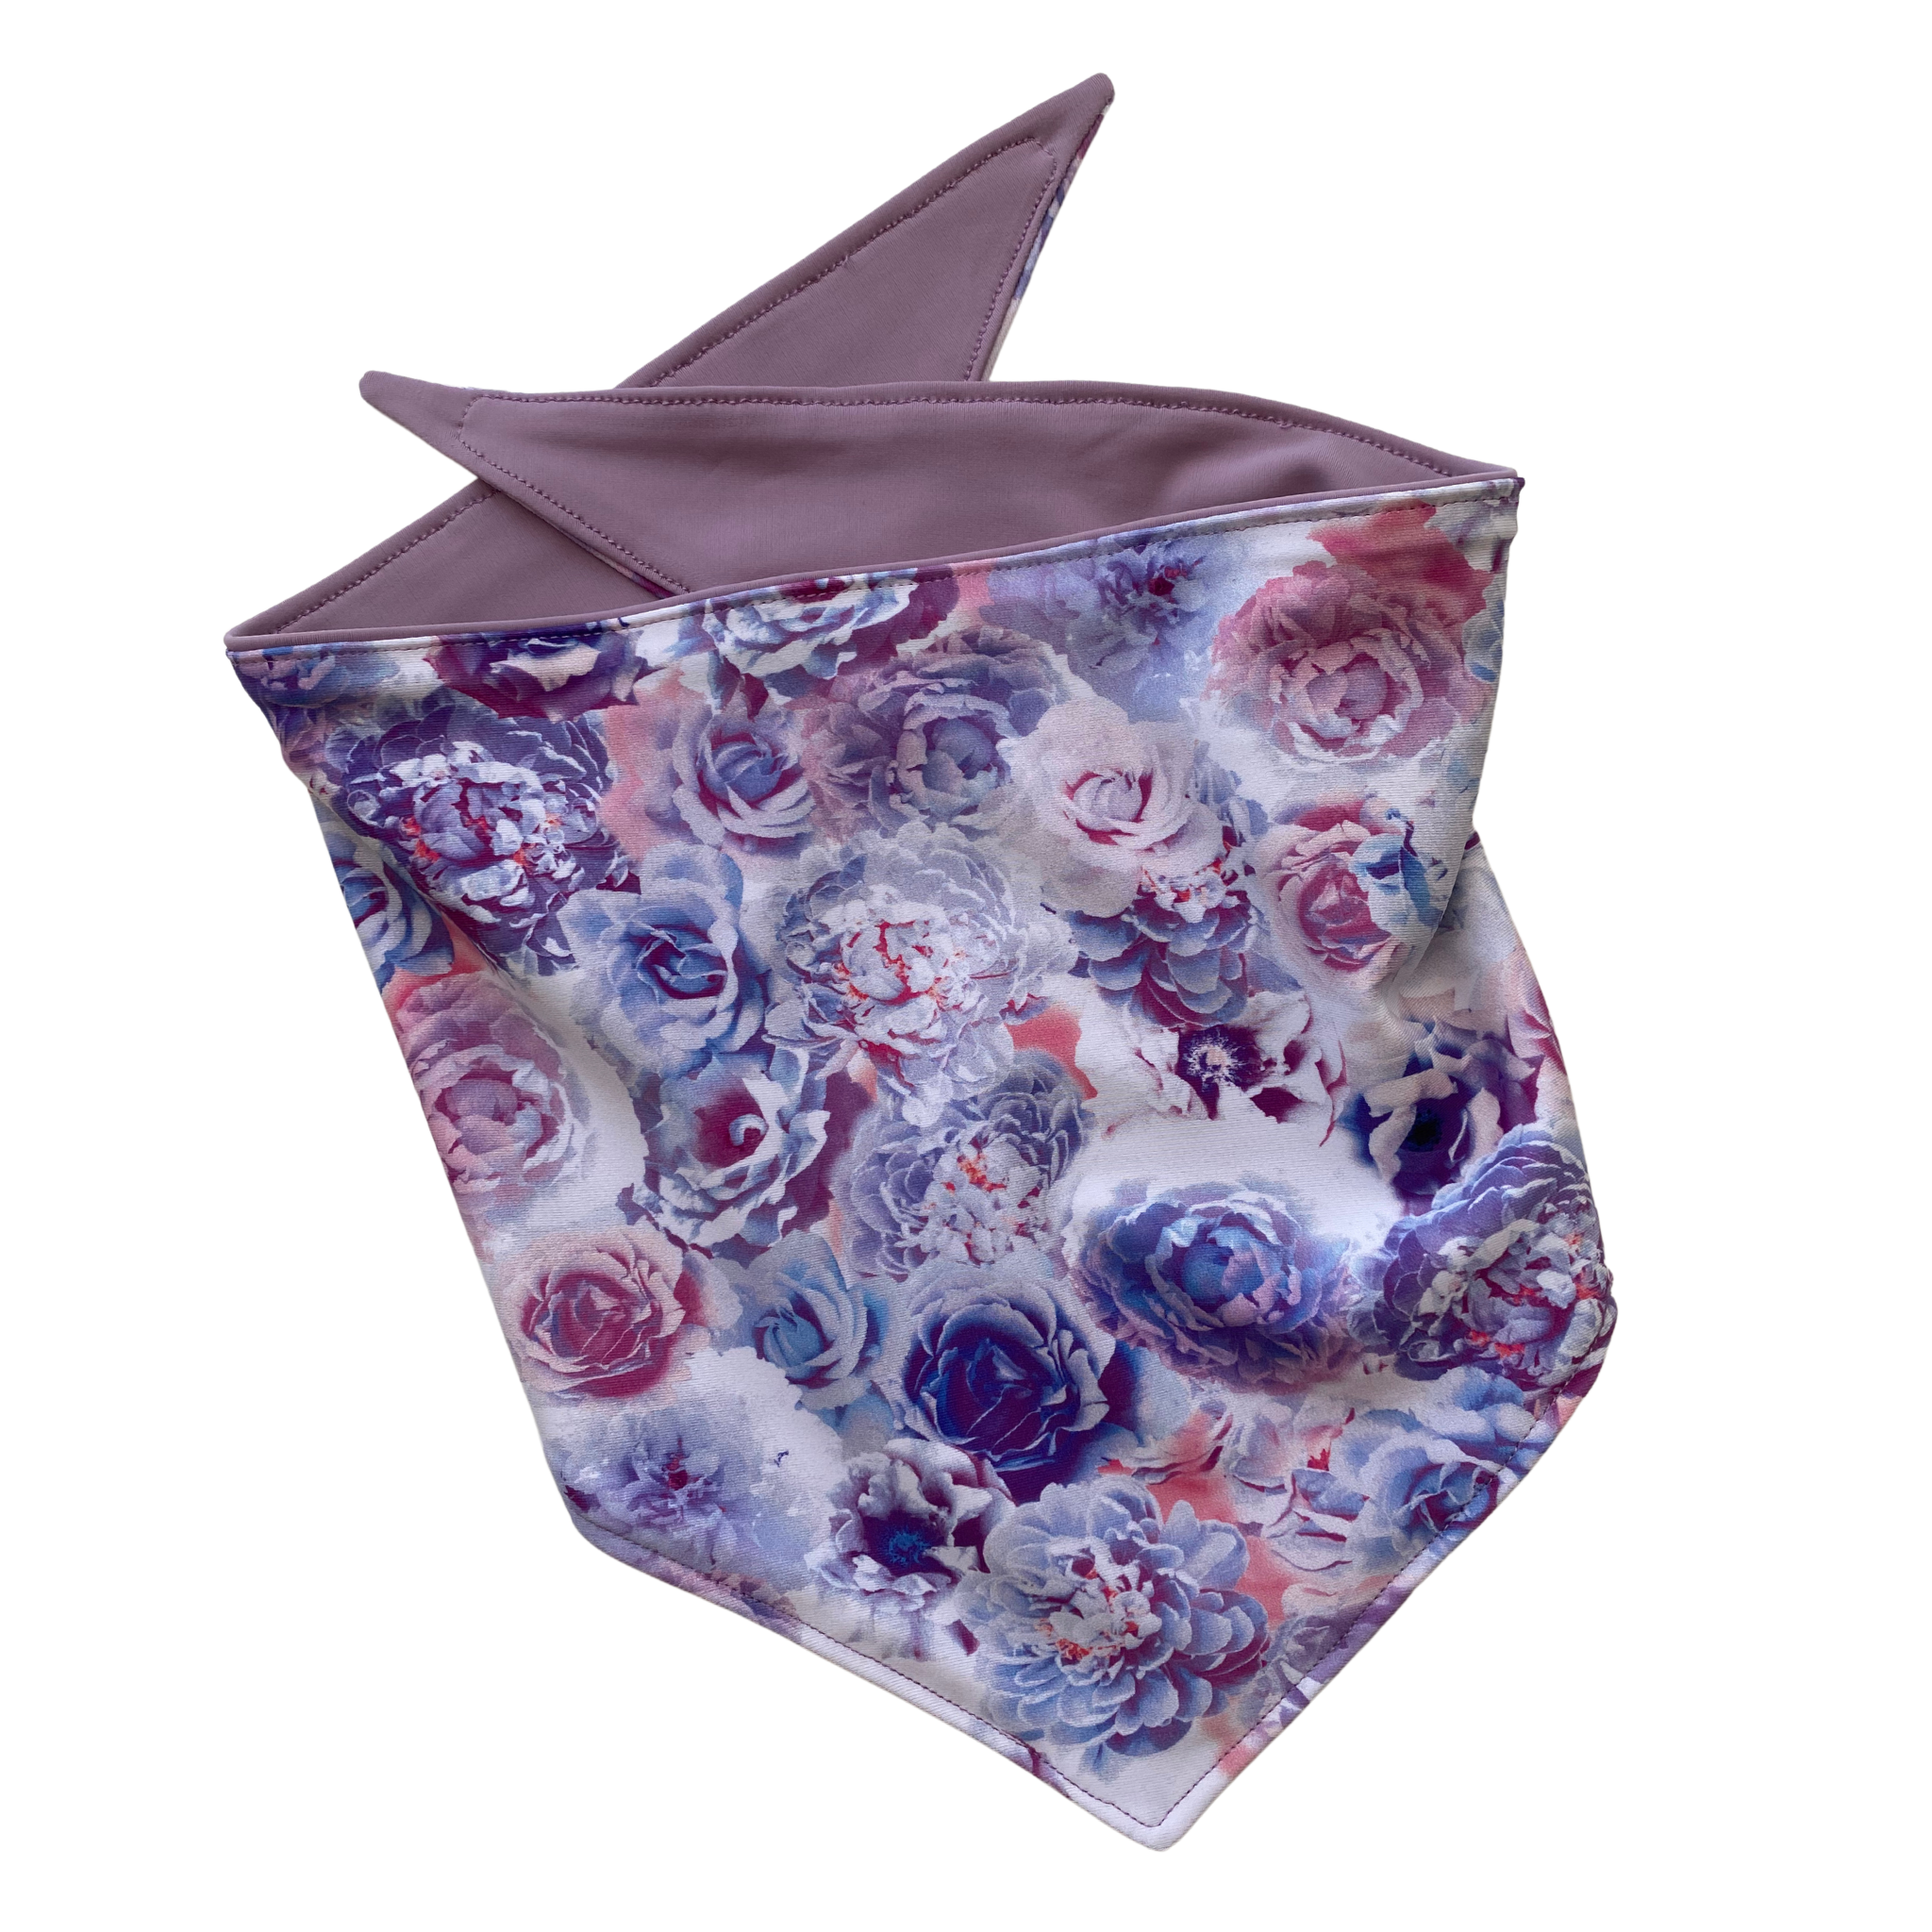 A close-up view of a Reversible Lavender and Pastel Rose Print Dog Swim scARF. The scARF features a soft lavender side on one half and a charming pastel rose print on the other half.